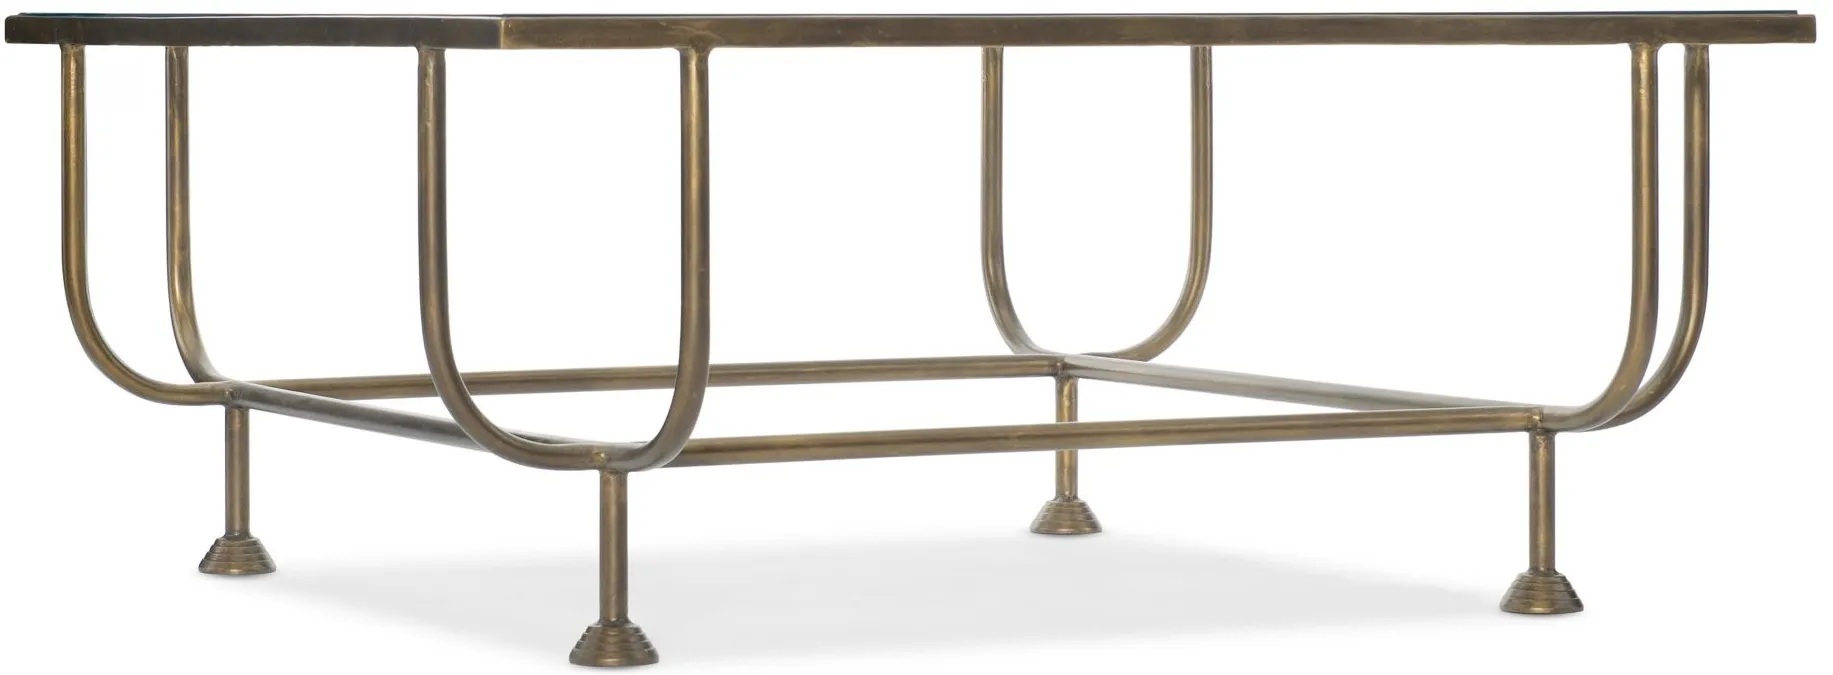 Commerce & Market Kiara Square Cocktail Table in Golds by Hooker Furniture